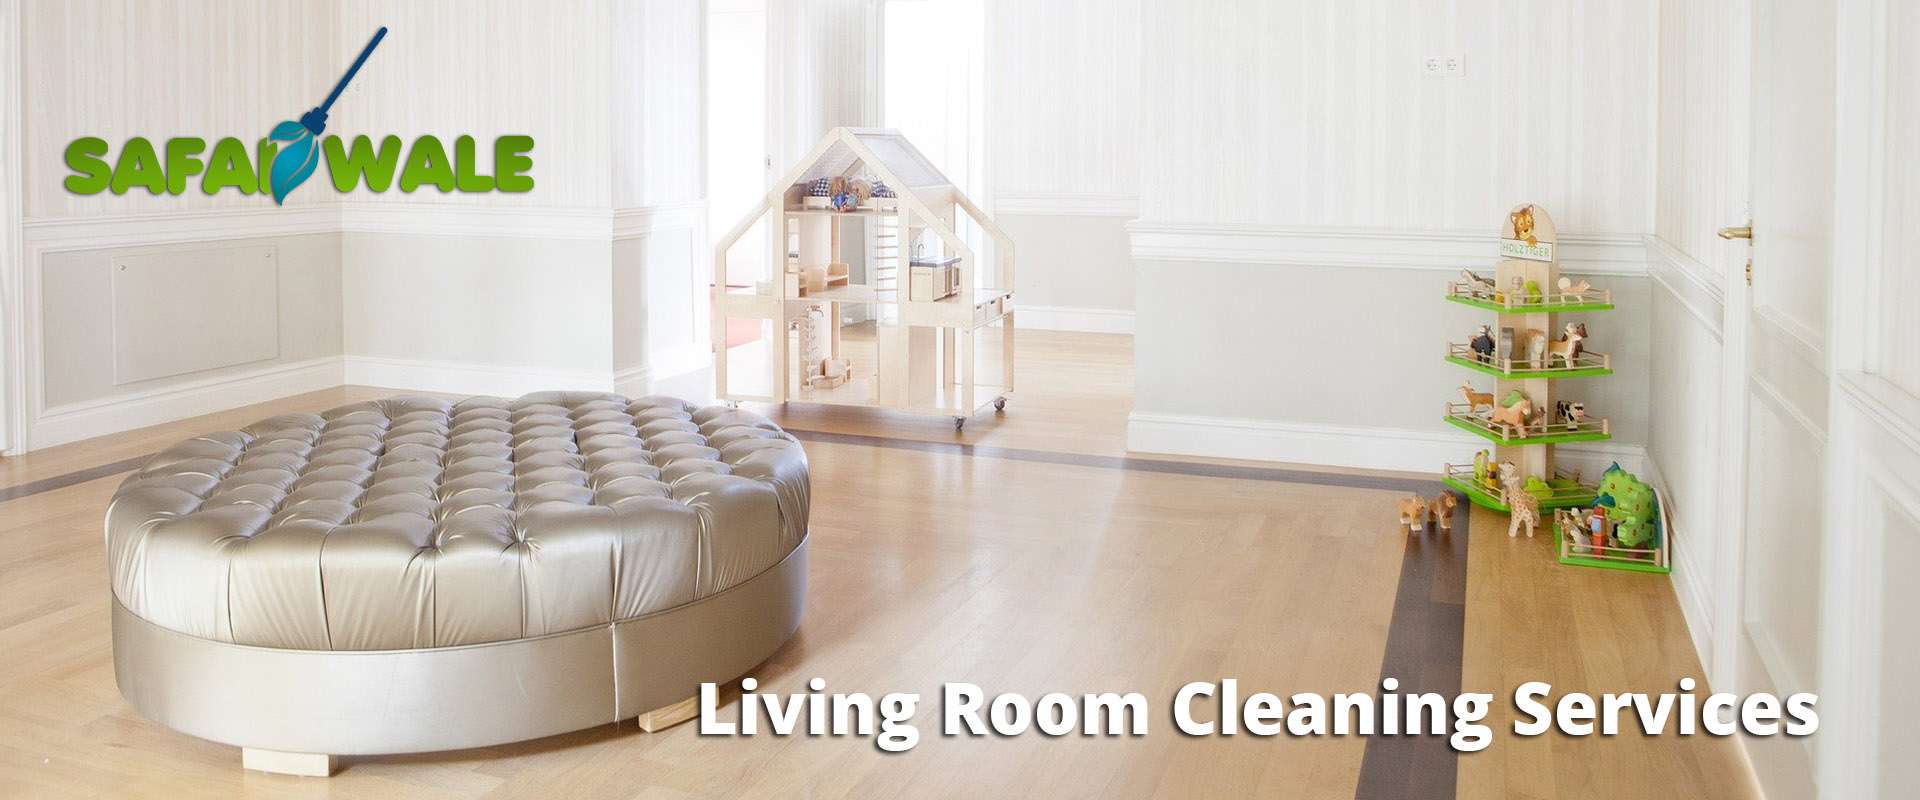 Living Room Cleaning Services